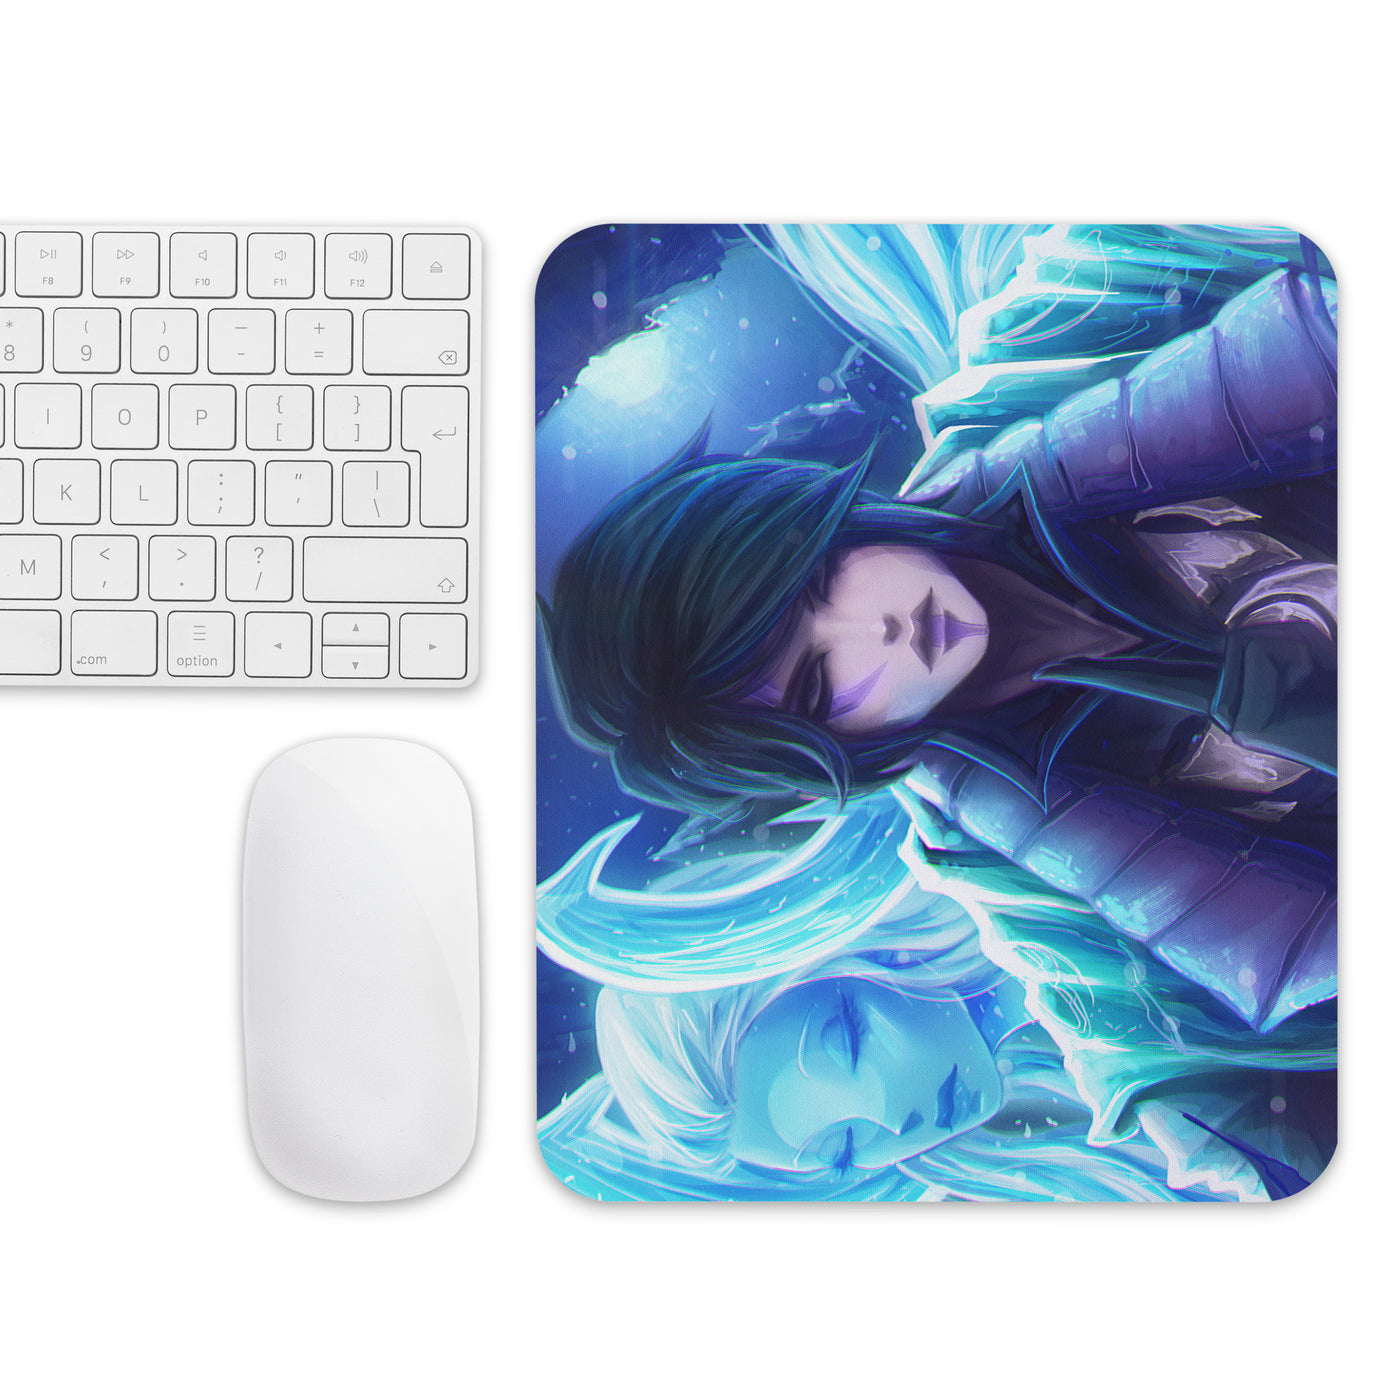 Aphelios from League of Legends Mouse Pad